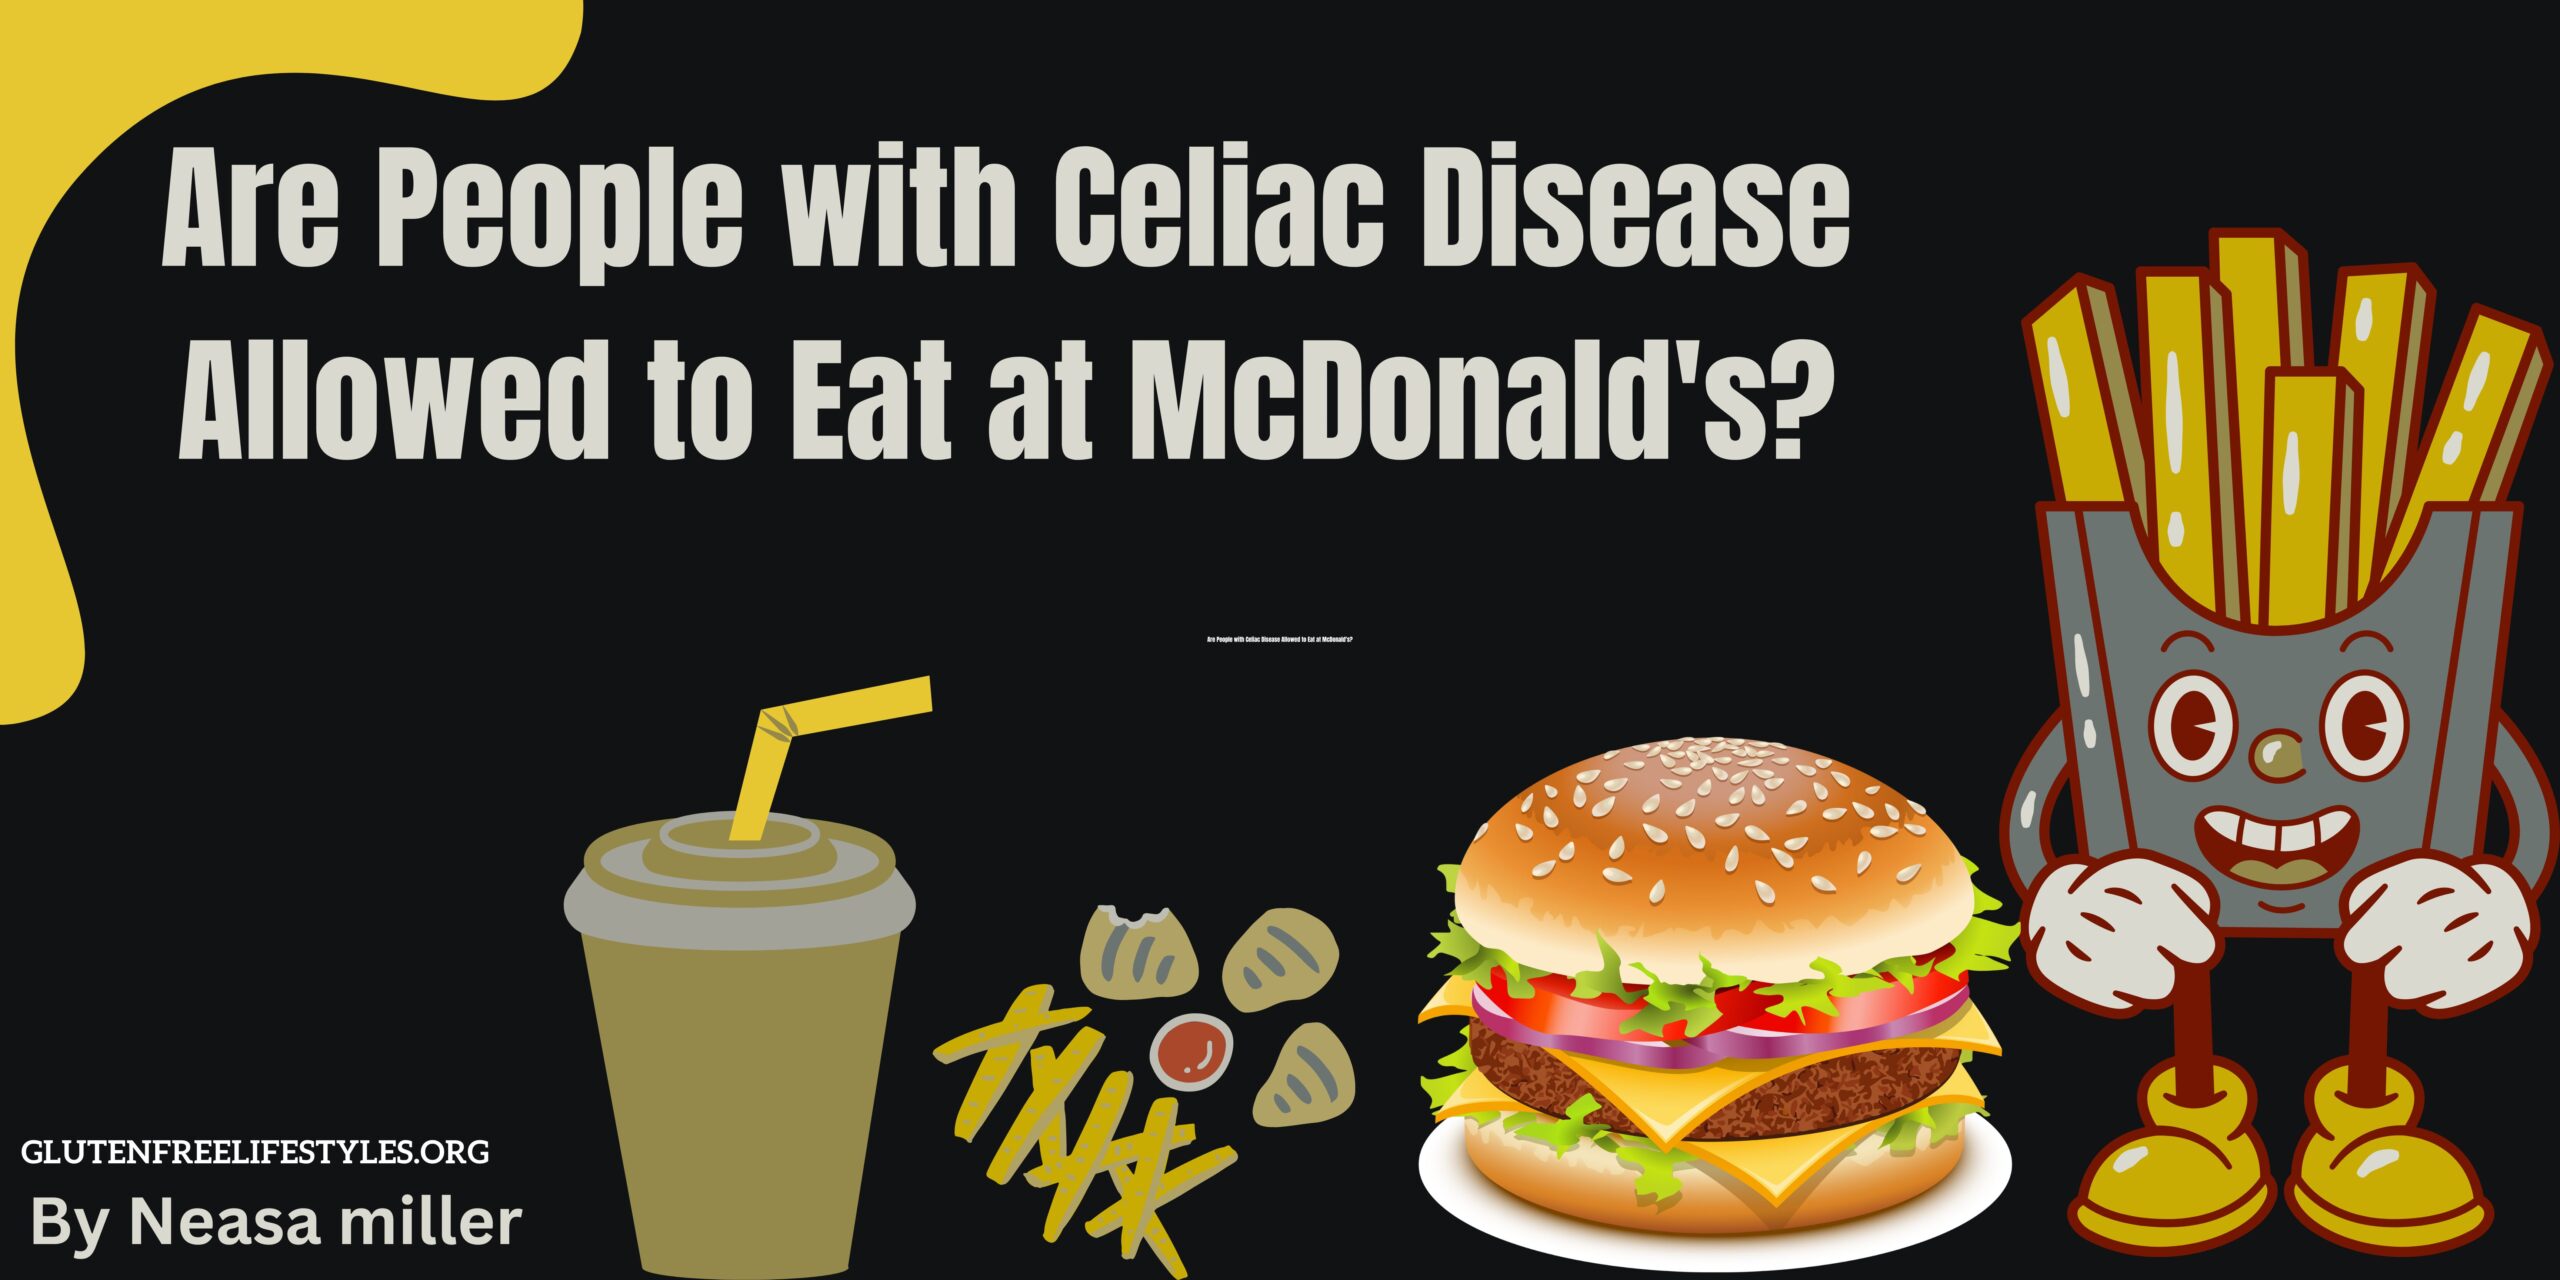 Are People with Celiac Disease Allowed to Eat at McDonald's?